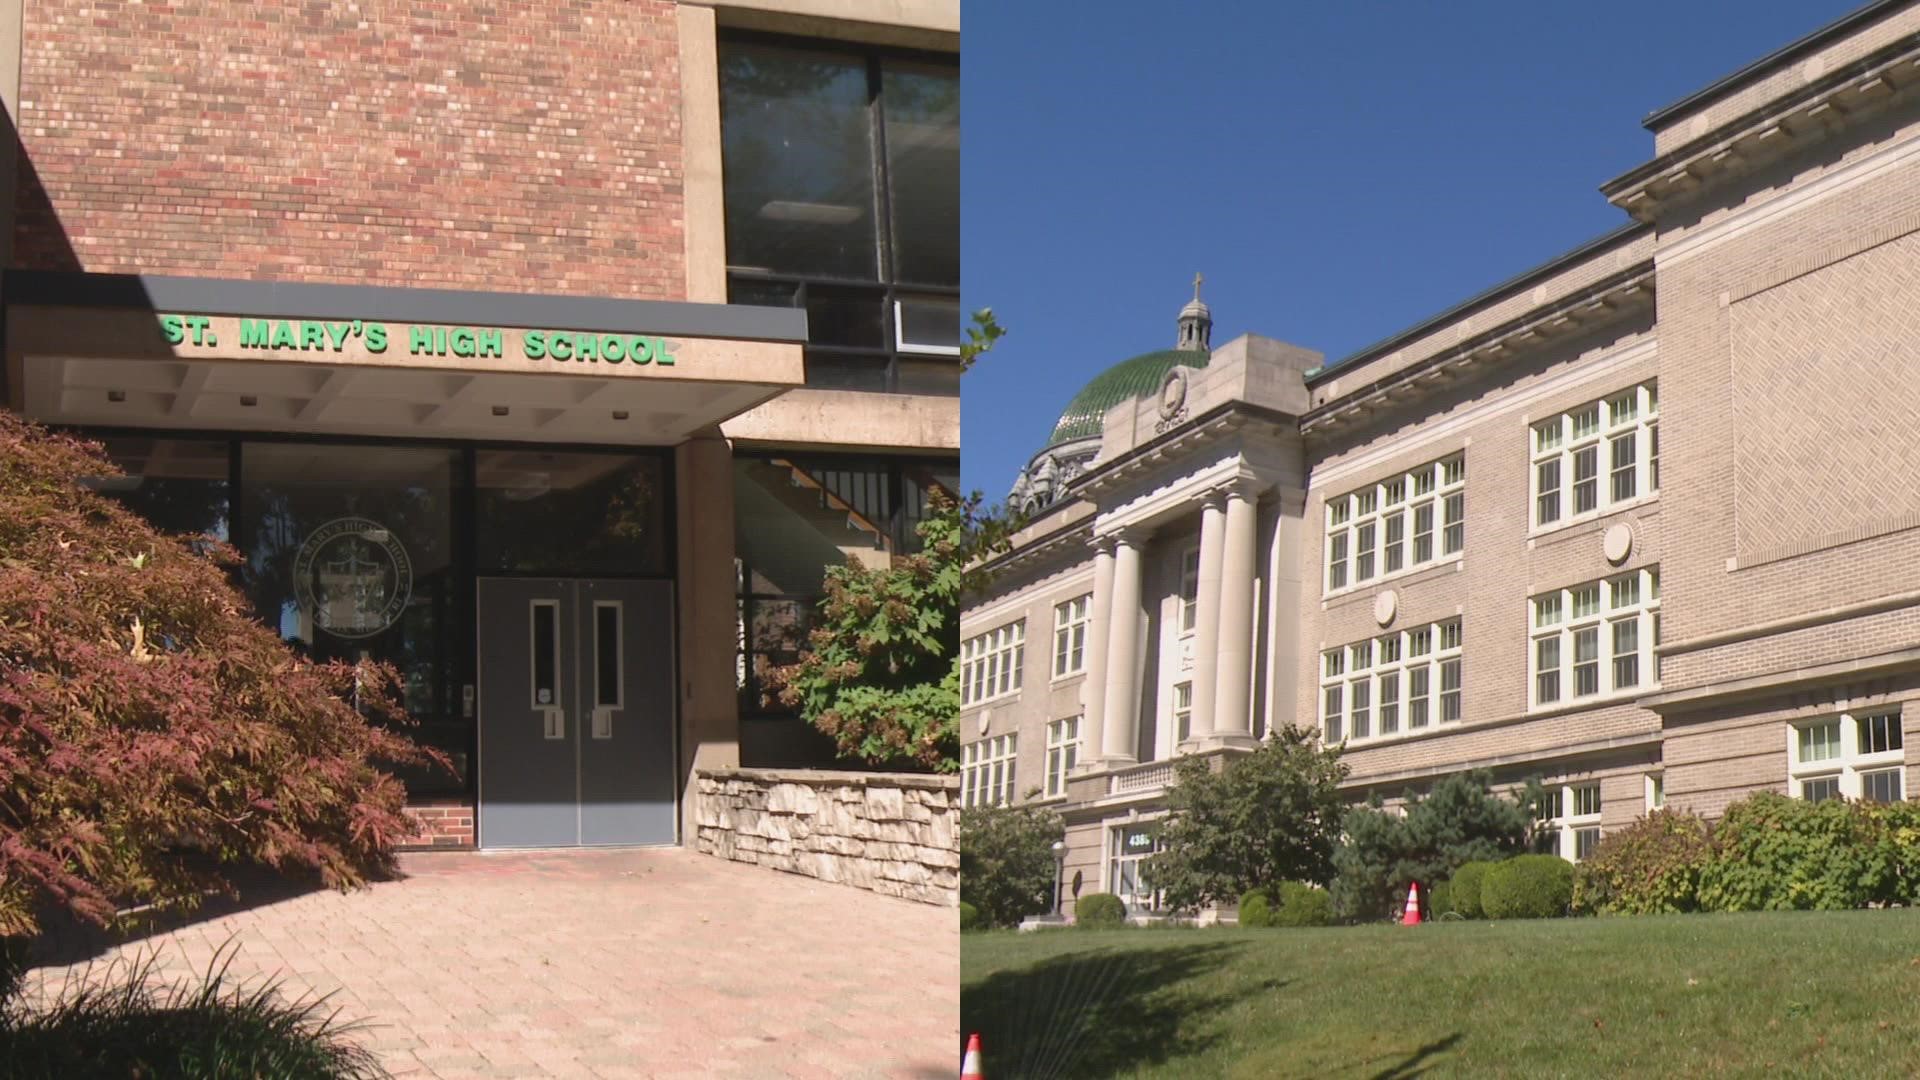 In a message to the school community, St. Mary's High School leaders said they are working on a plan to keep the all-boys school open beyond this year.